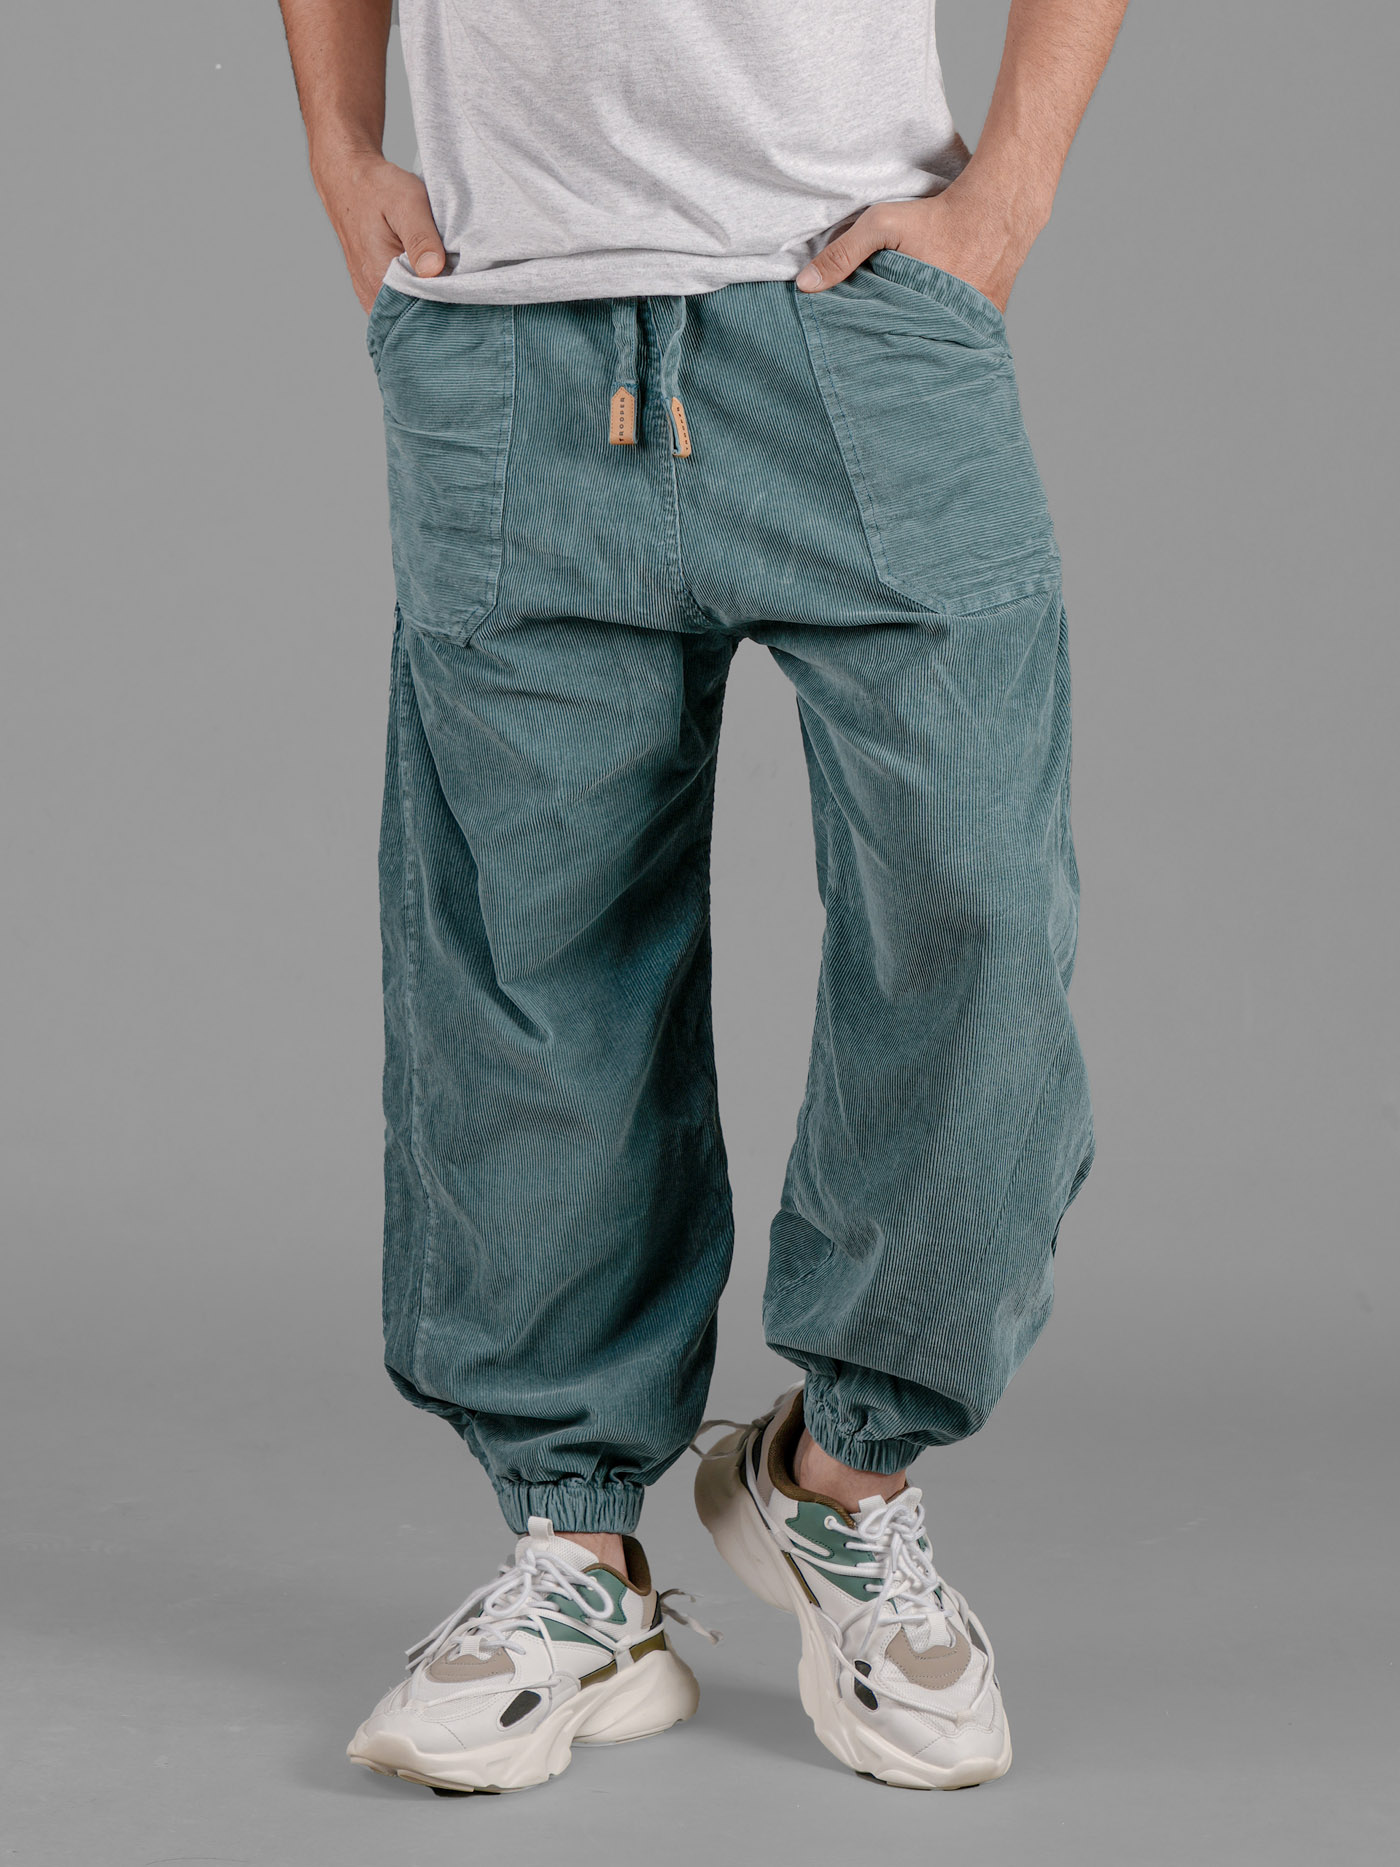 Teal Crosses Printed Cotton Hoppers – Unisex Pants - Bombay Trooper